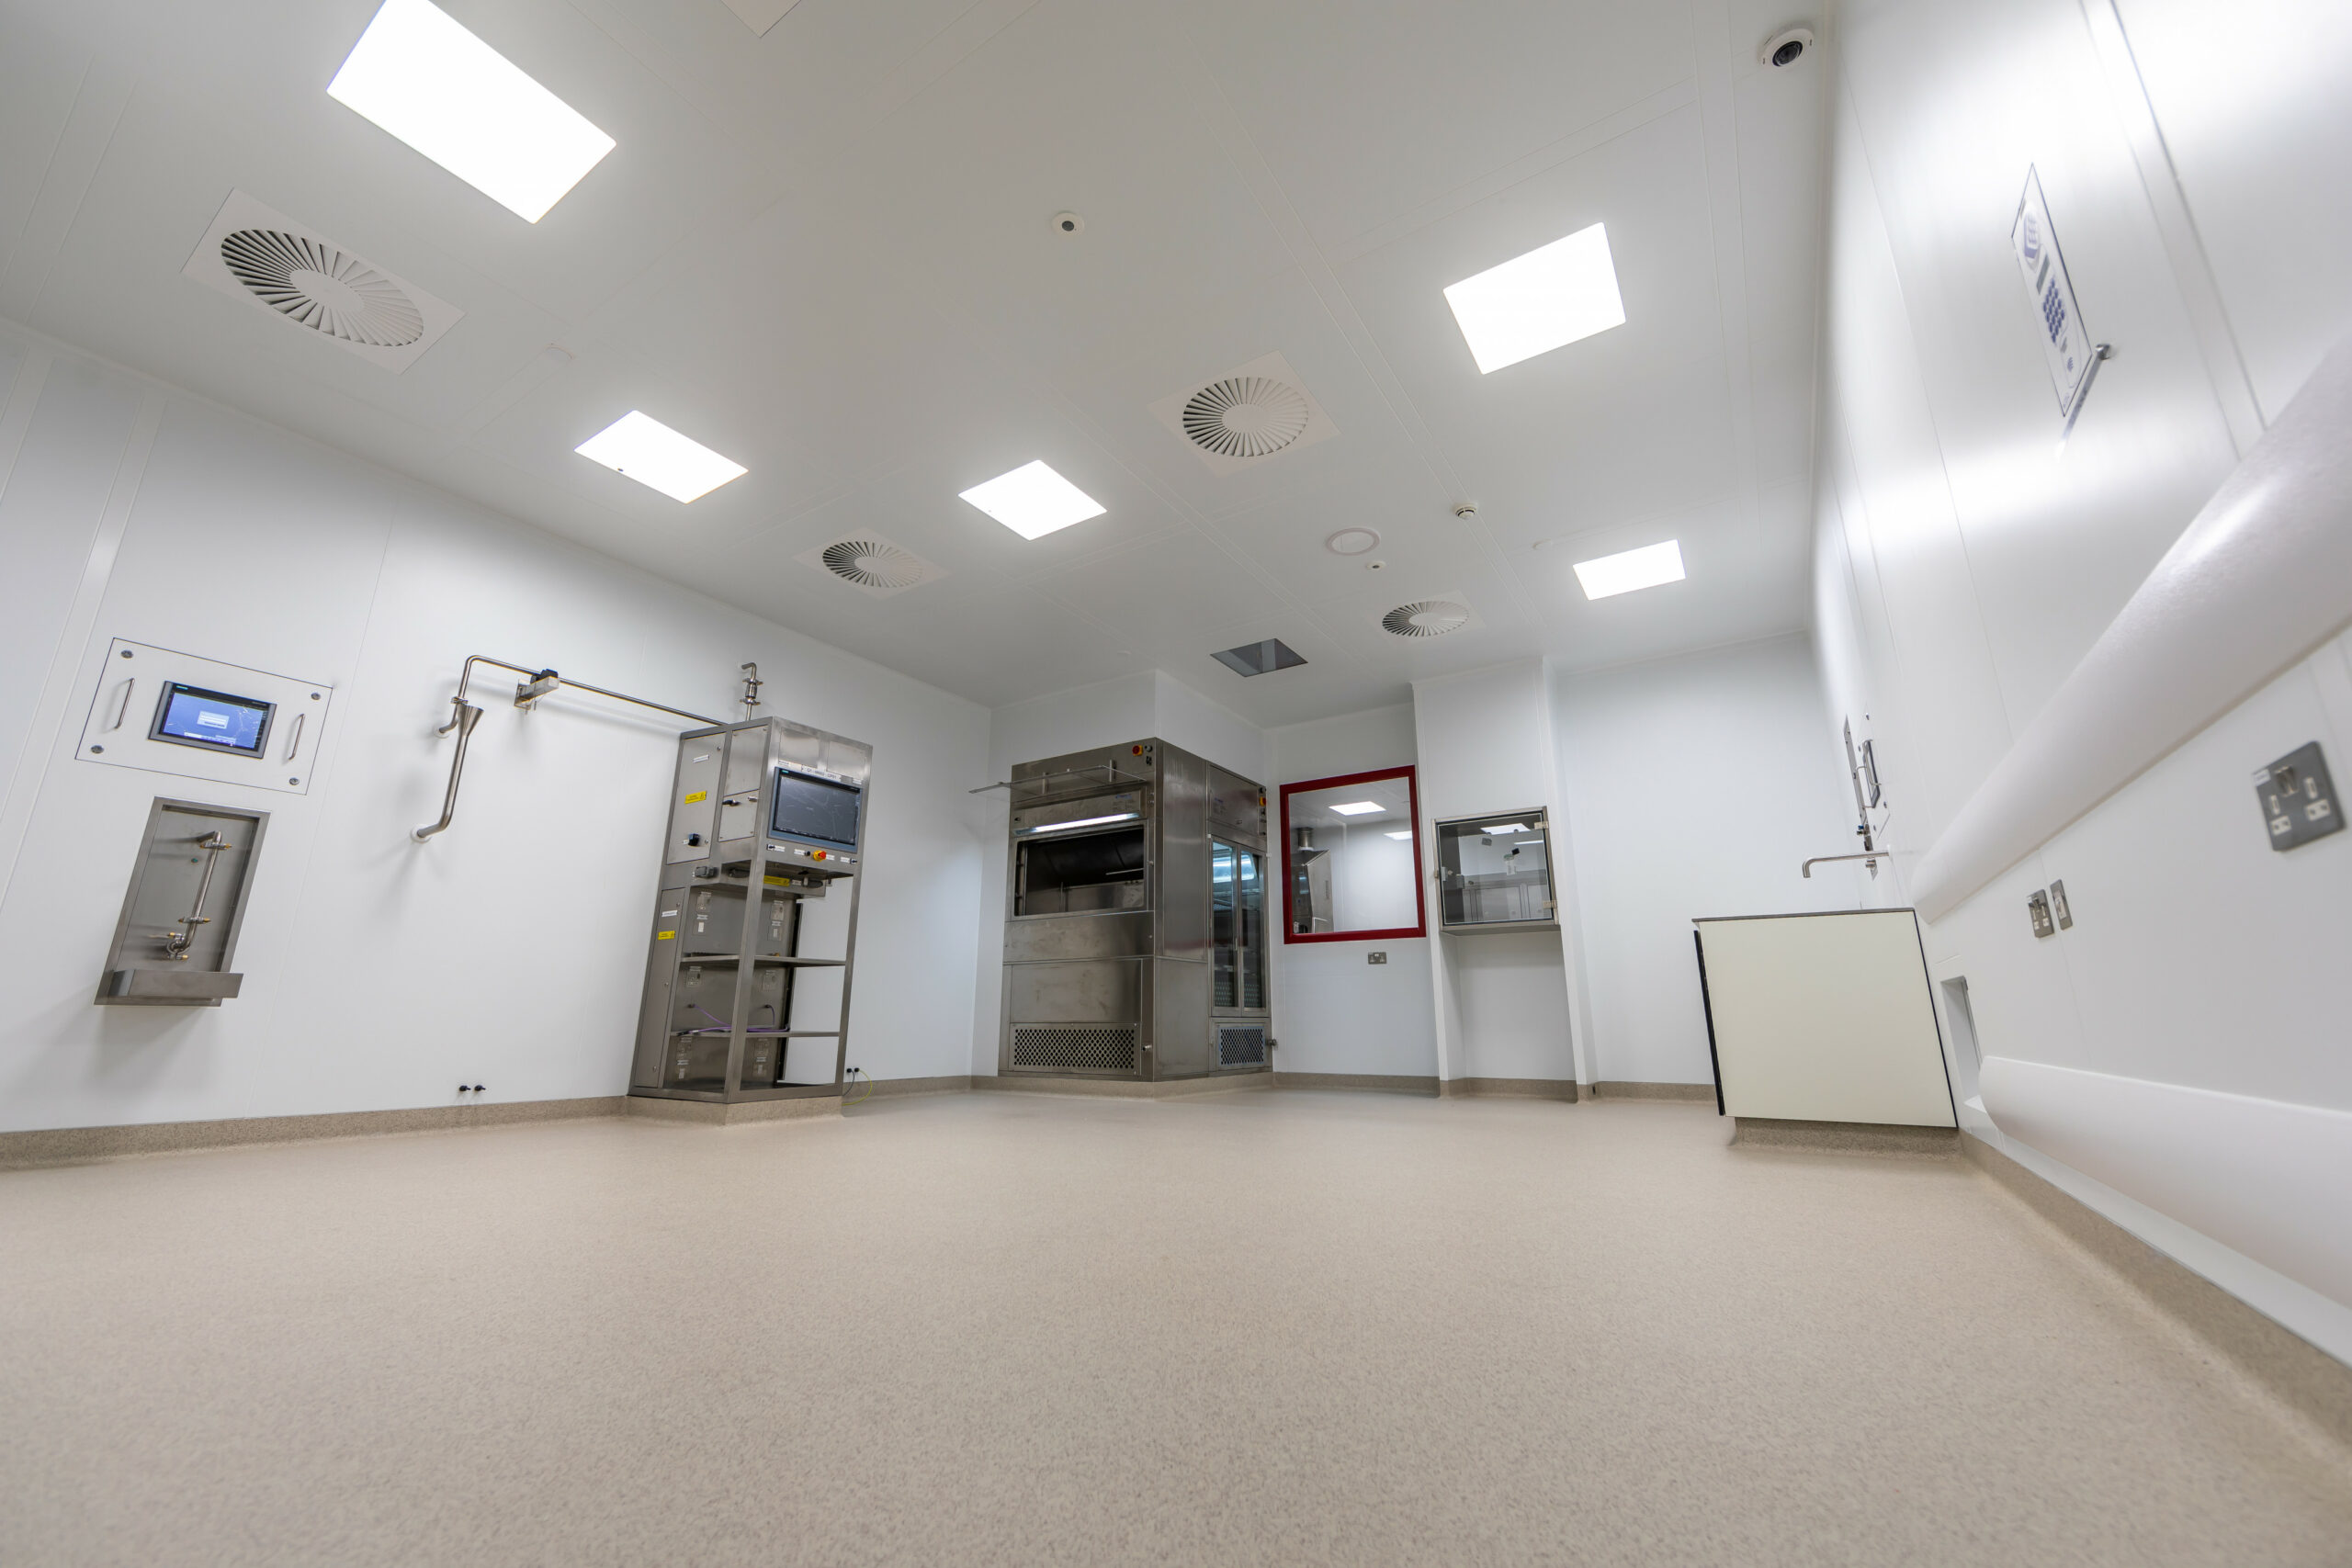 Featured image for “A Cleanroom Approach”